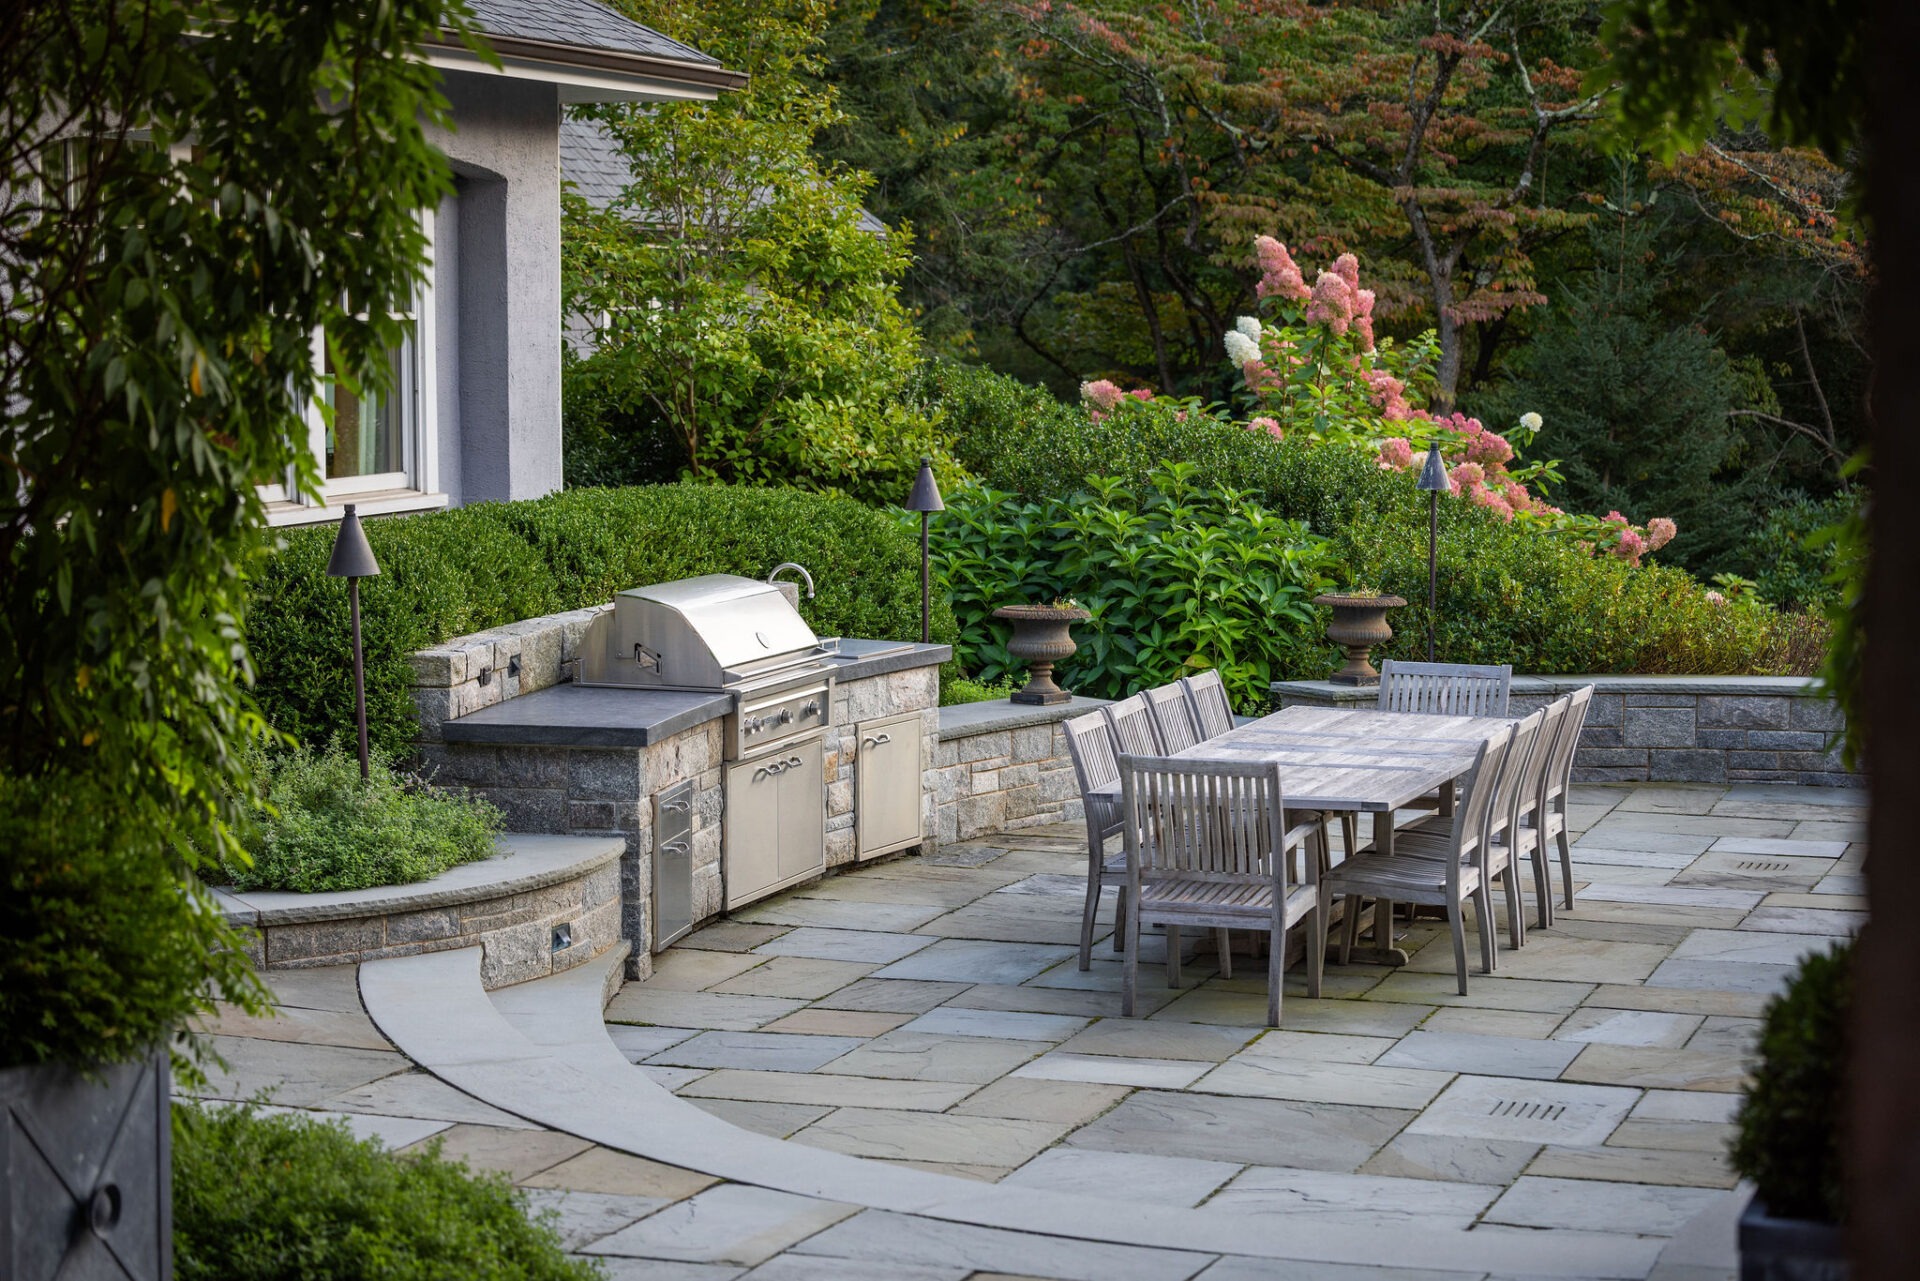 An outdoor stone patio with a built-in grill, a dining table with chairs, surrounded by lush greenery and flowering plants in a residential backyard.